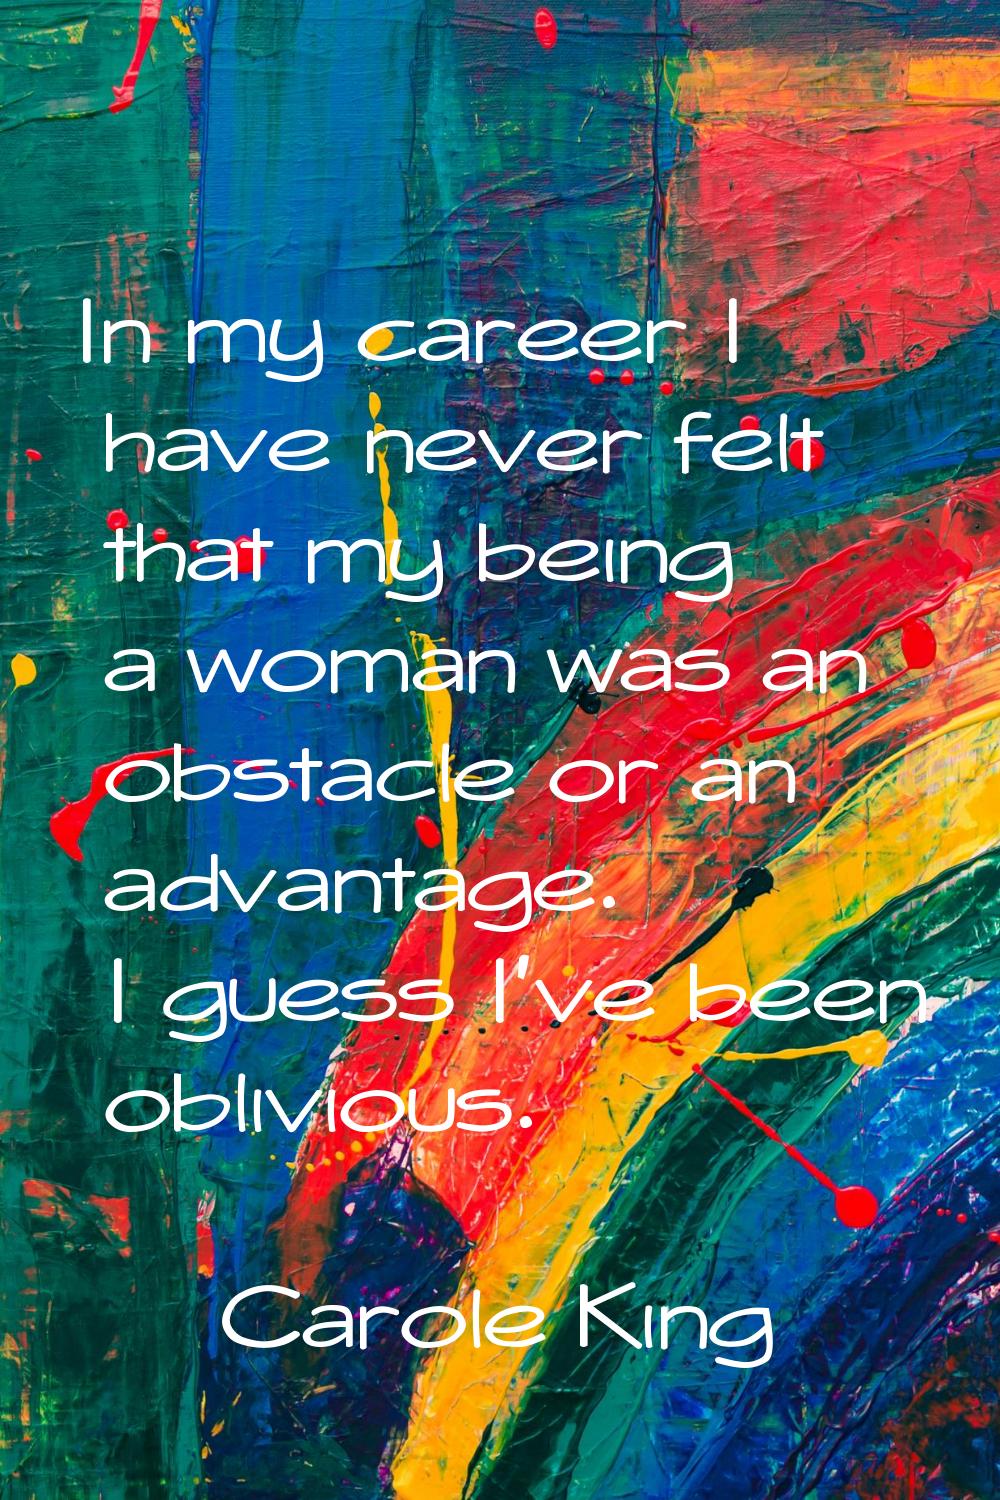 In my career I have never felt that my being a woman was an obstacle or an advantage. I guess I've 